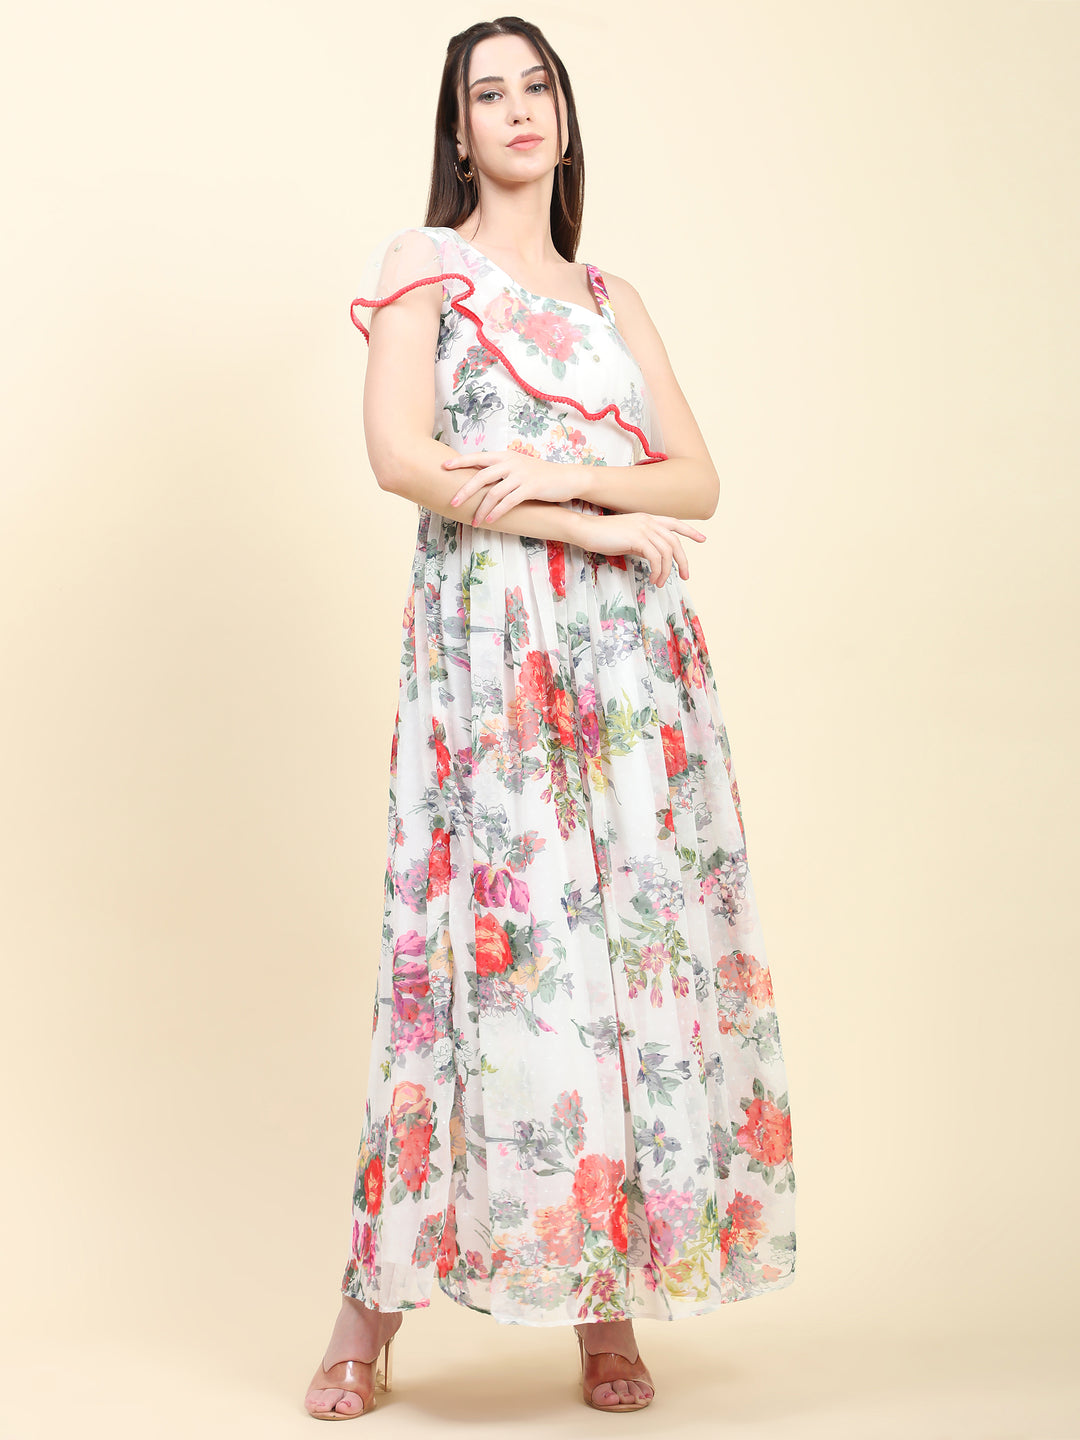 Miracolos One Shoulder Floral Printed Georgette Dress white base - RENT